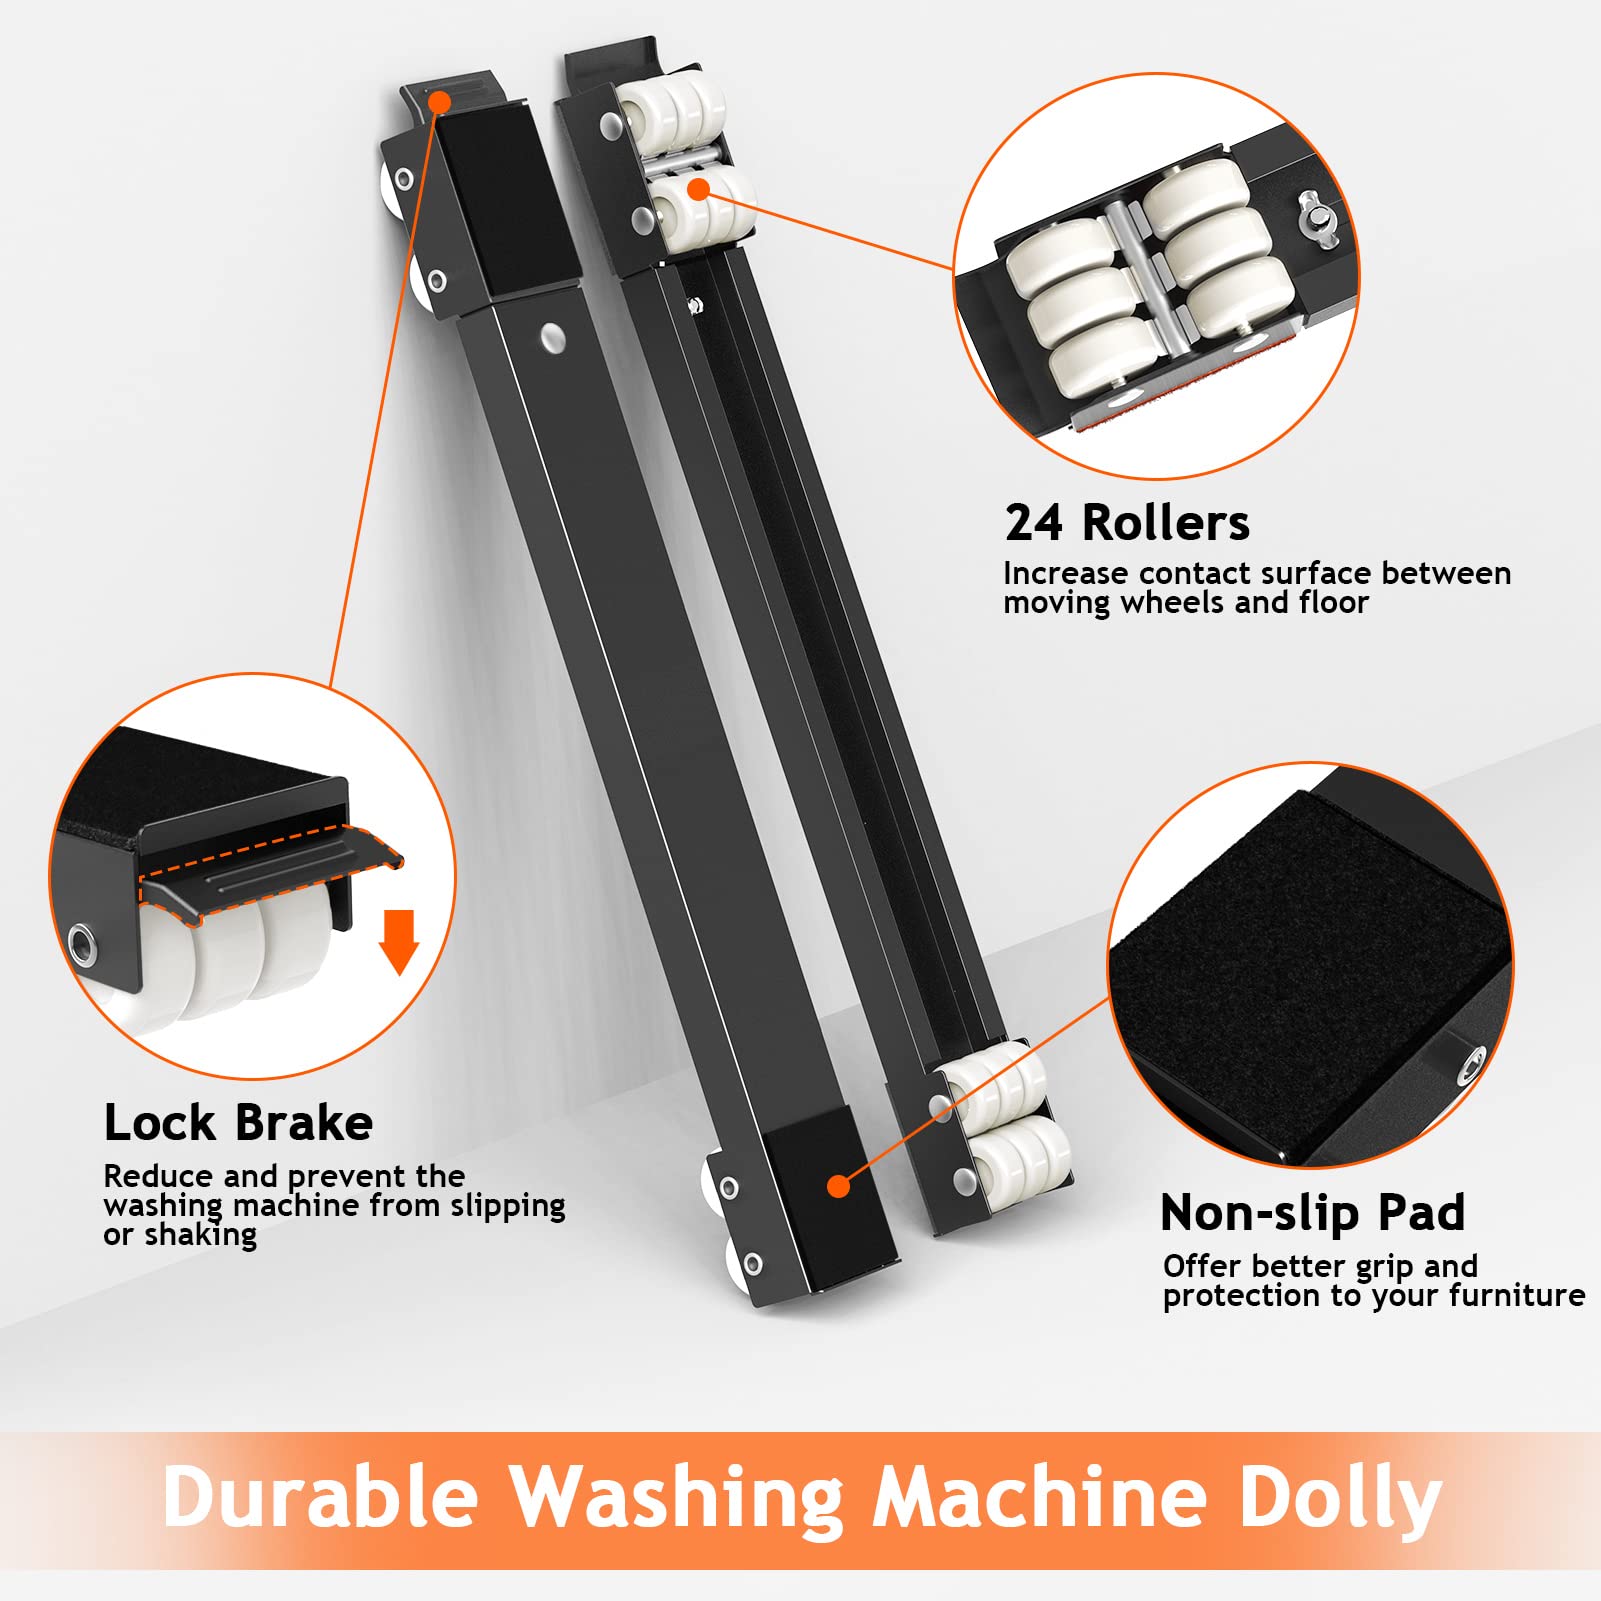 Ronlap Furniture Washing Machine Dolly, Extendable Appliance Rollers Refrigerator Heavy Duty, Washing Machine Stand Wheels Fridge Appliance Dolly Movers Mobile Washer and Dryer Moving Base, Black